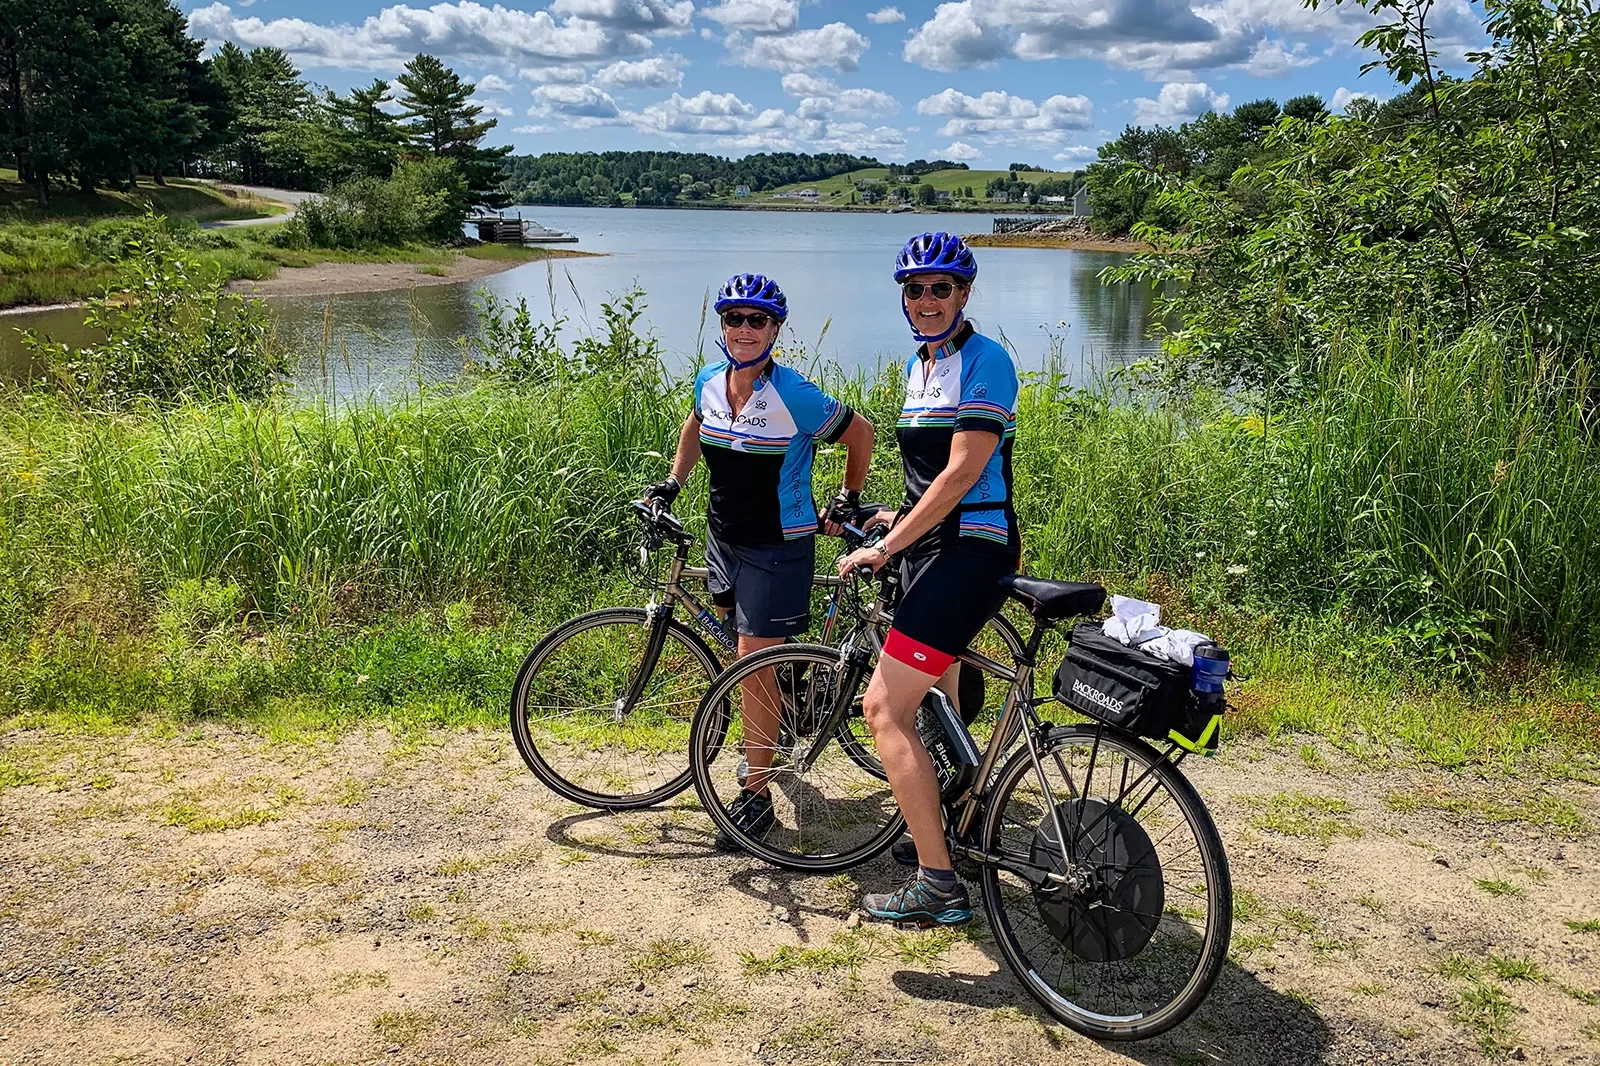 Two guests on their bikes posing in front of small lake.